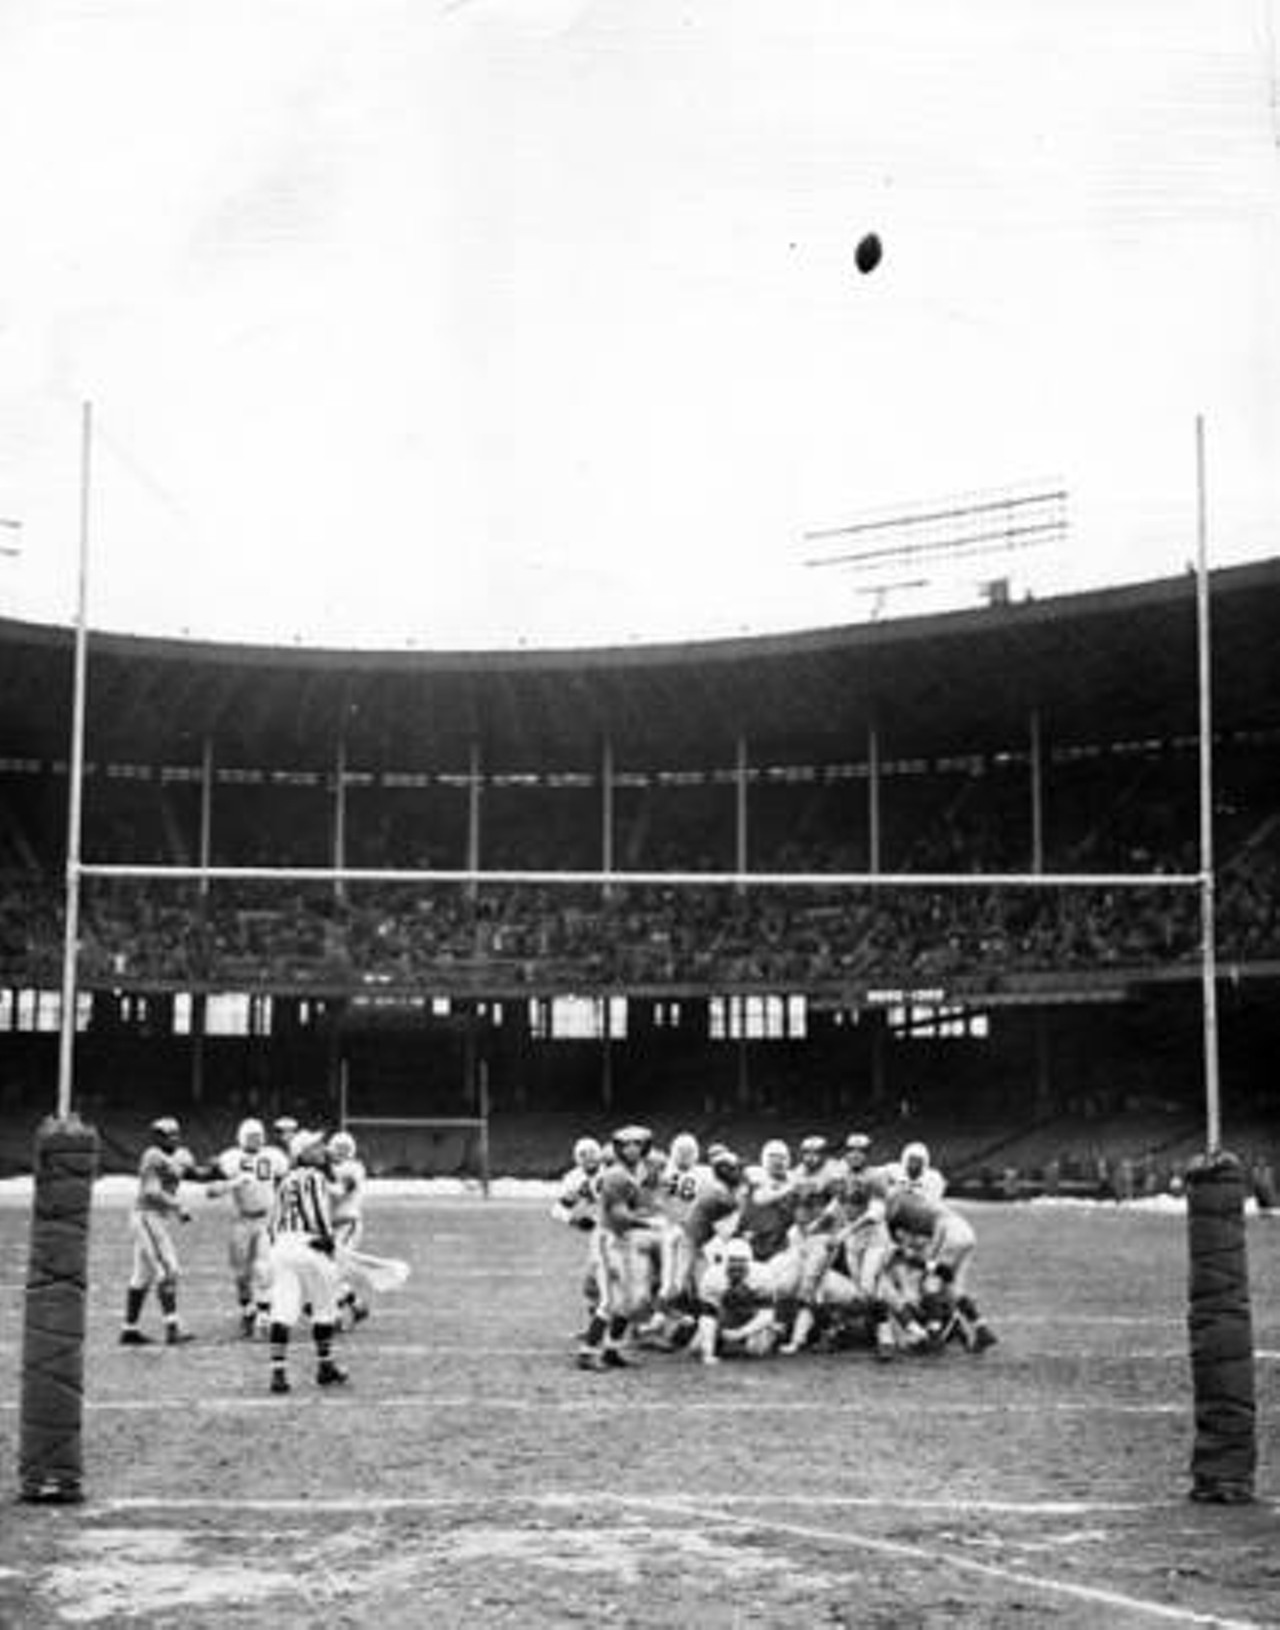 1950 NFL Championship Title Game, Cleveland Browns vs. Los Angeles Rams